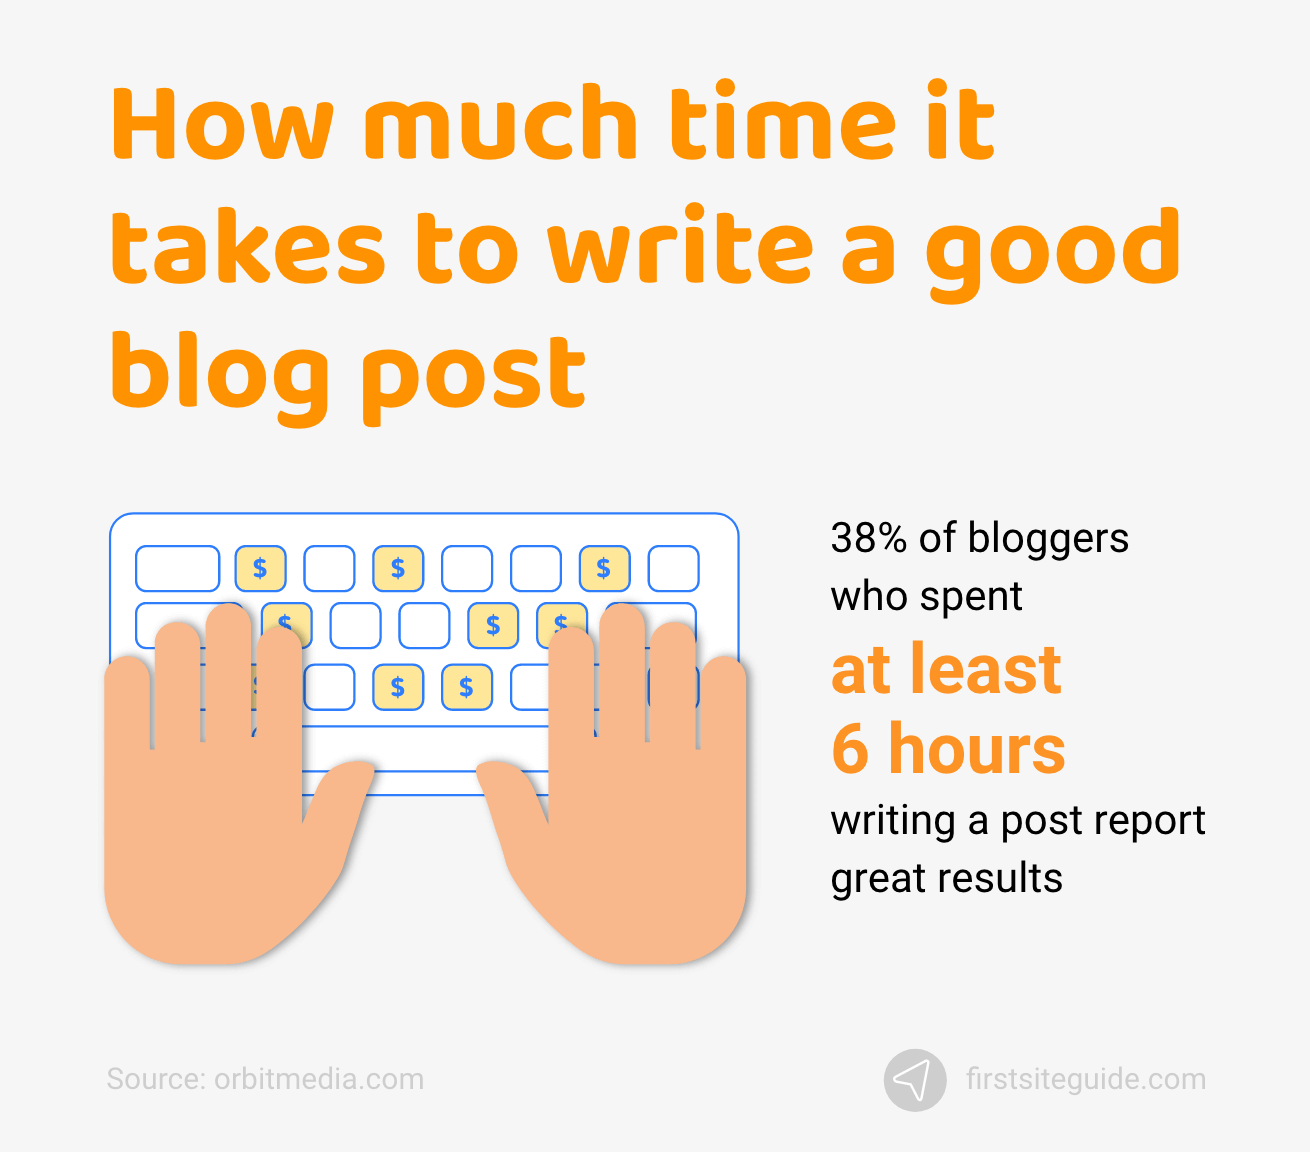 How much time it takes to write a good blog post